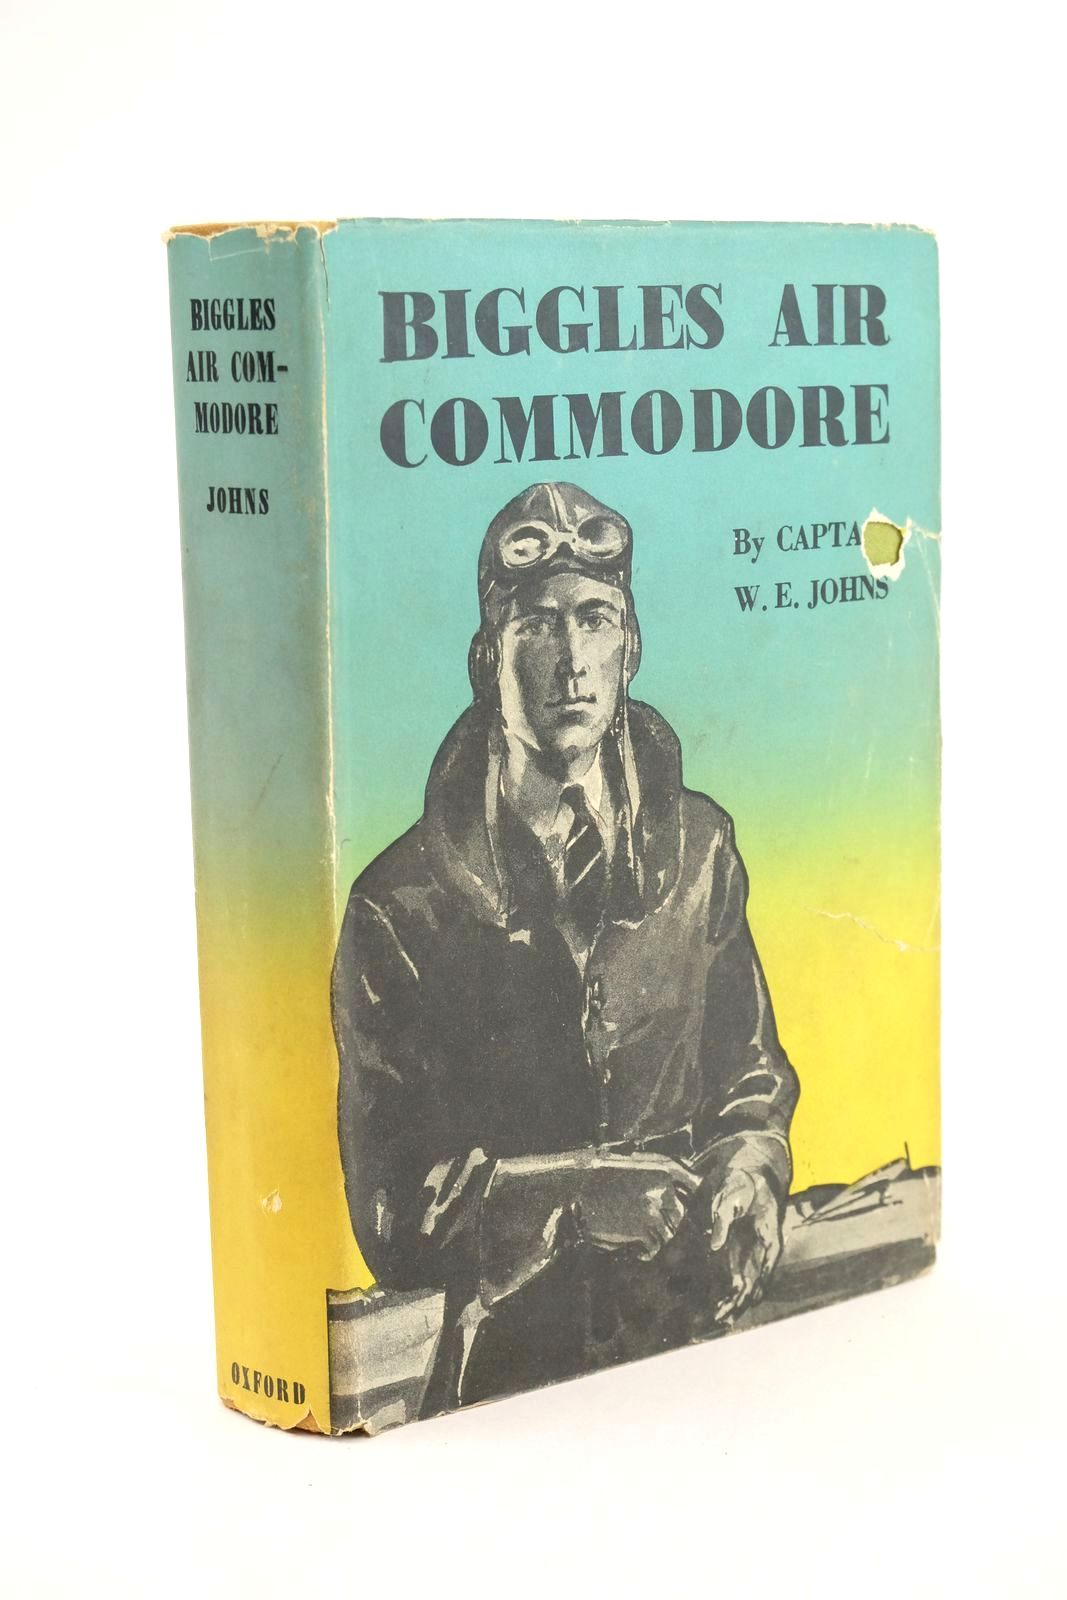 Cover of BIGGLES AIR COMMODORE by W.E. Johns